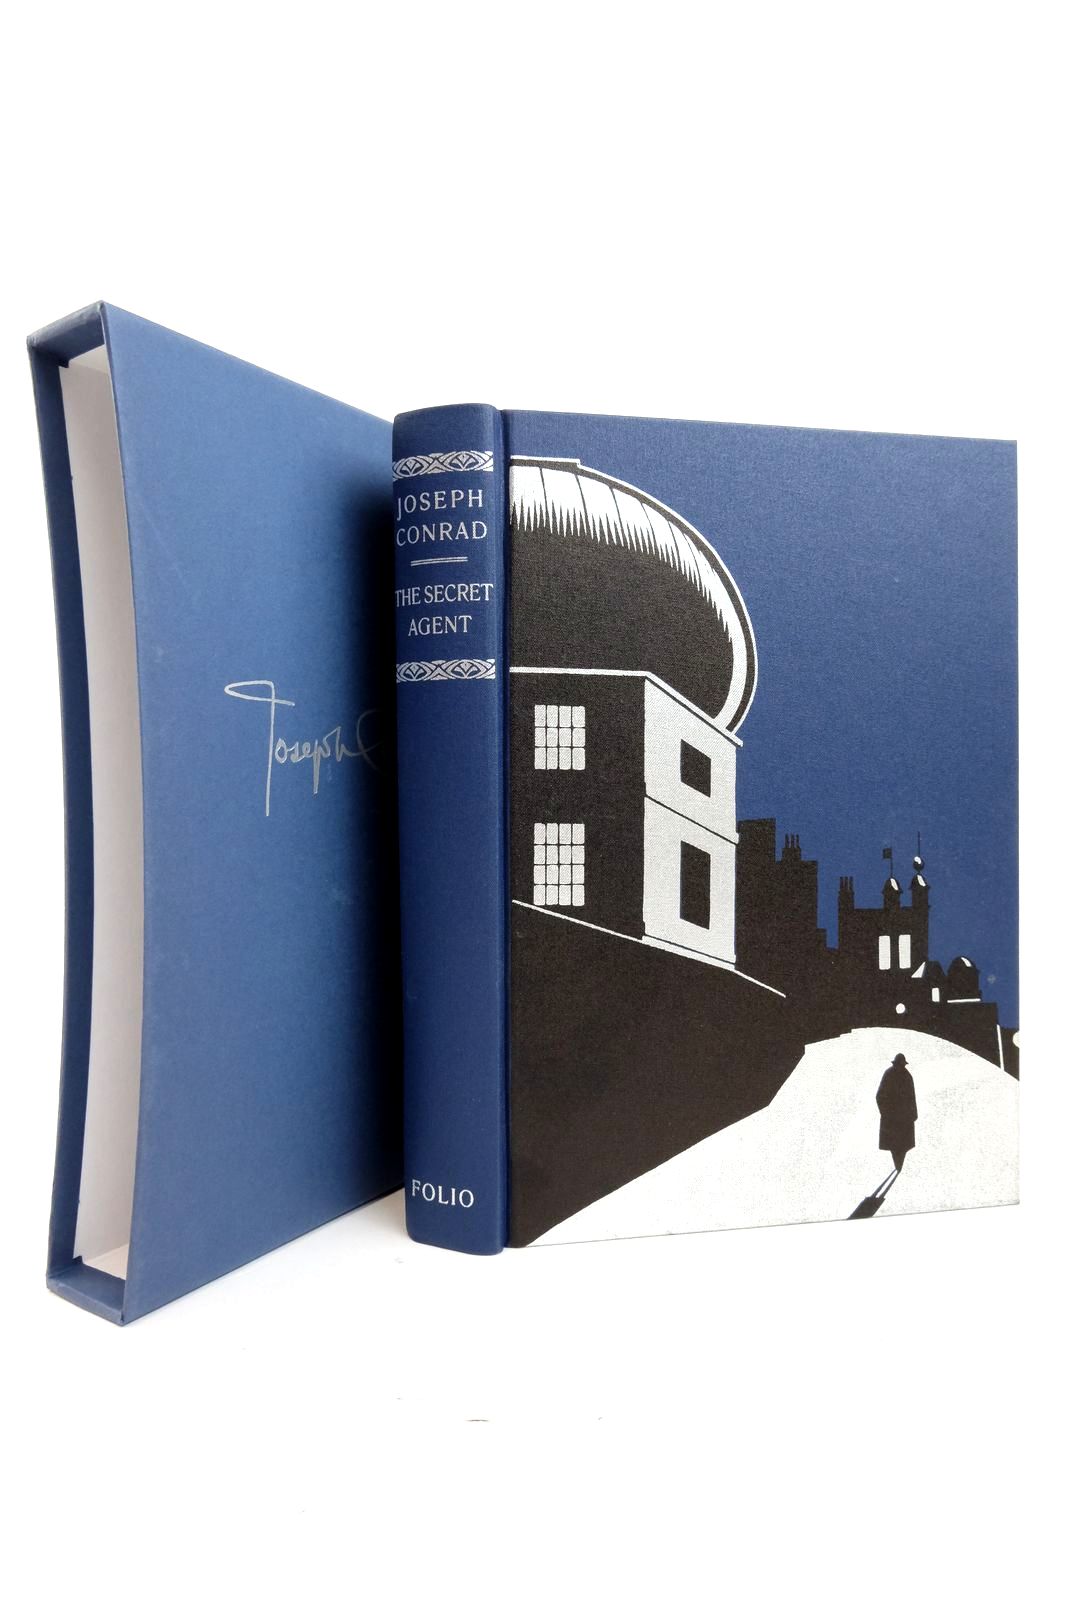 Photo of THE SECRET AGENT: A SIMPLE TALE written by Conrad, Joseph Ward, Colin illustrated by Mosley, Francis published by Folio Society (STOCK CODE: 2136871)  for sale by Stella & Rose's Books